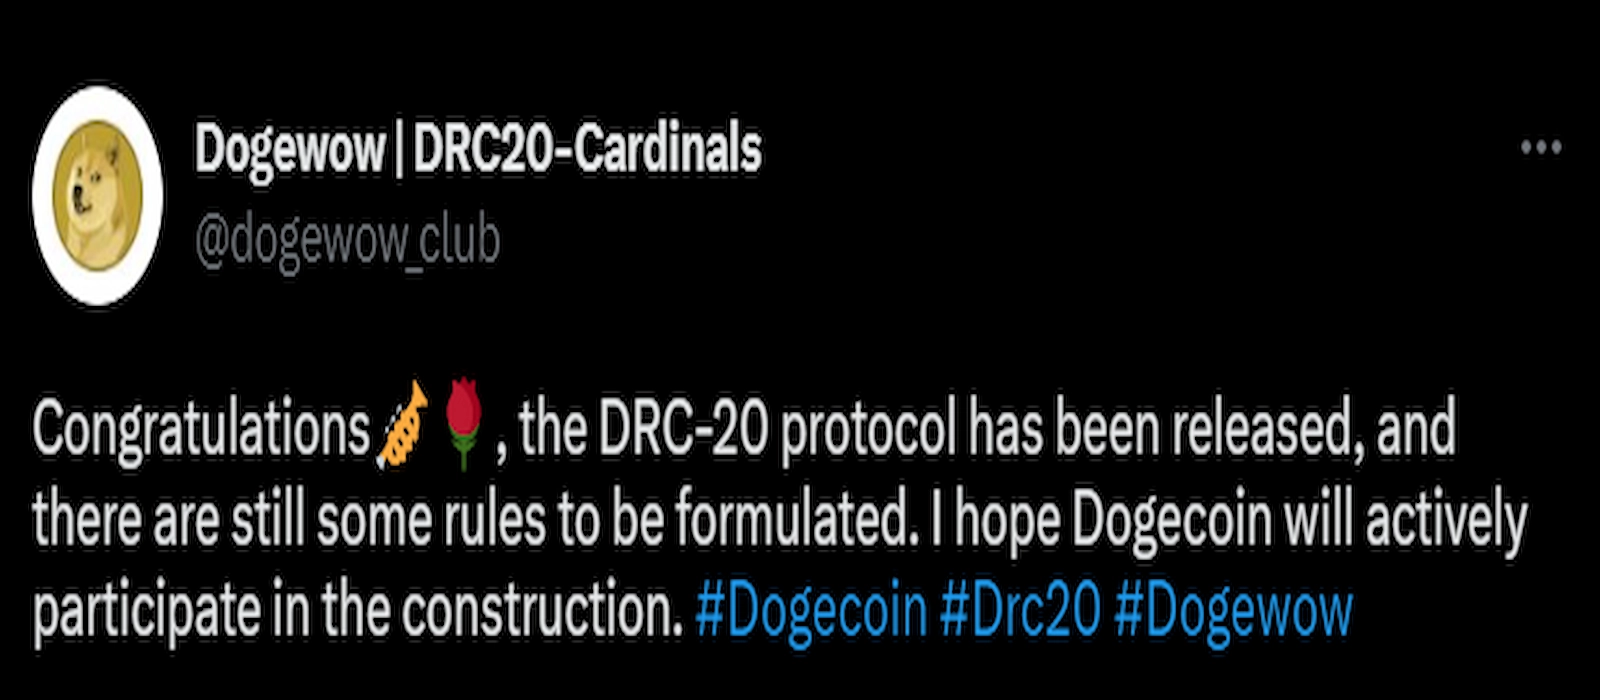 Dogecoin launched the DRC-20 protocol to introduce NFT minting on the blockchain